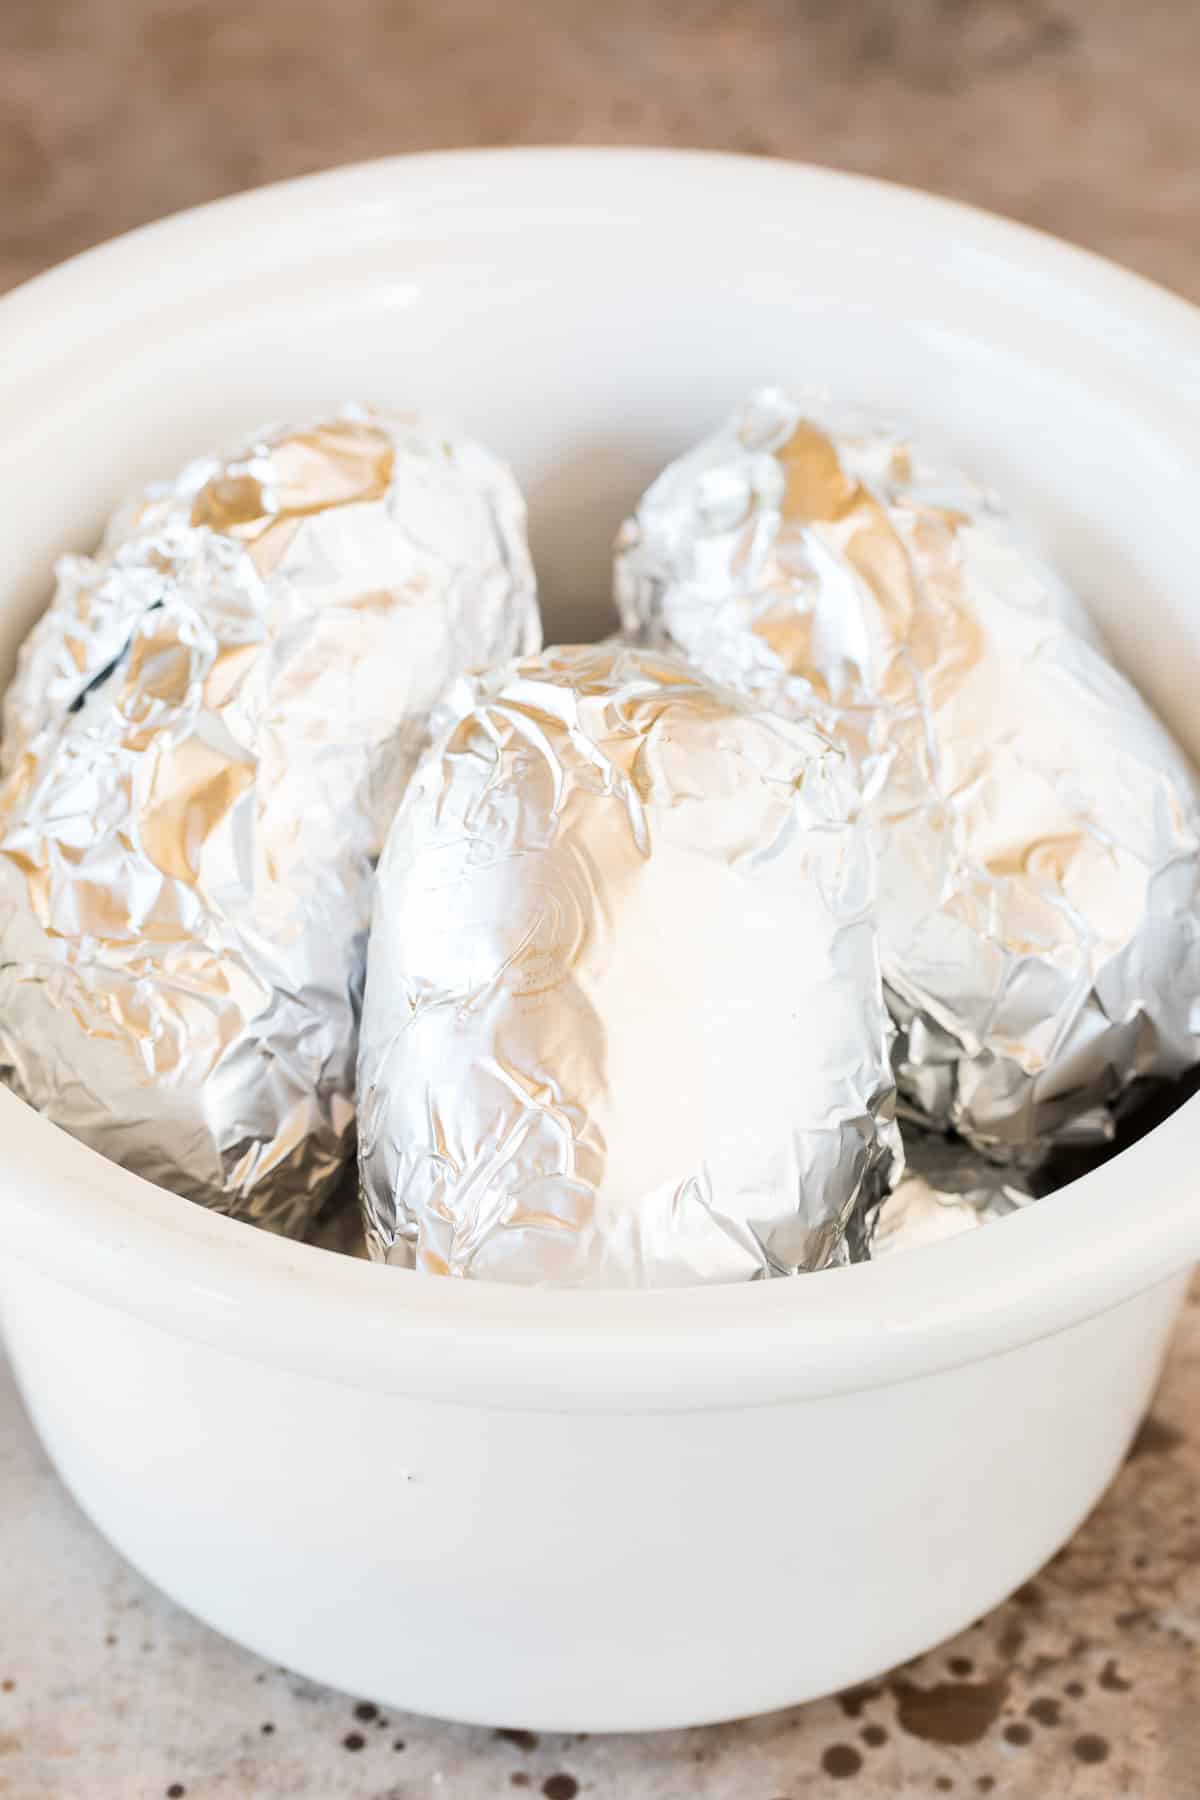 Potatoes wrapped in foil in a slow cooker.